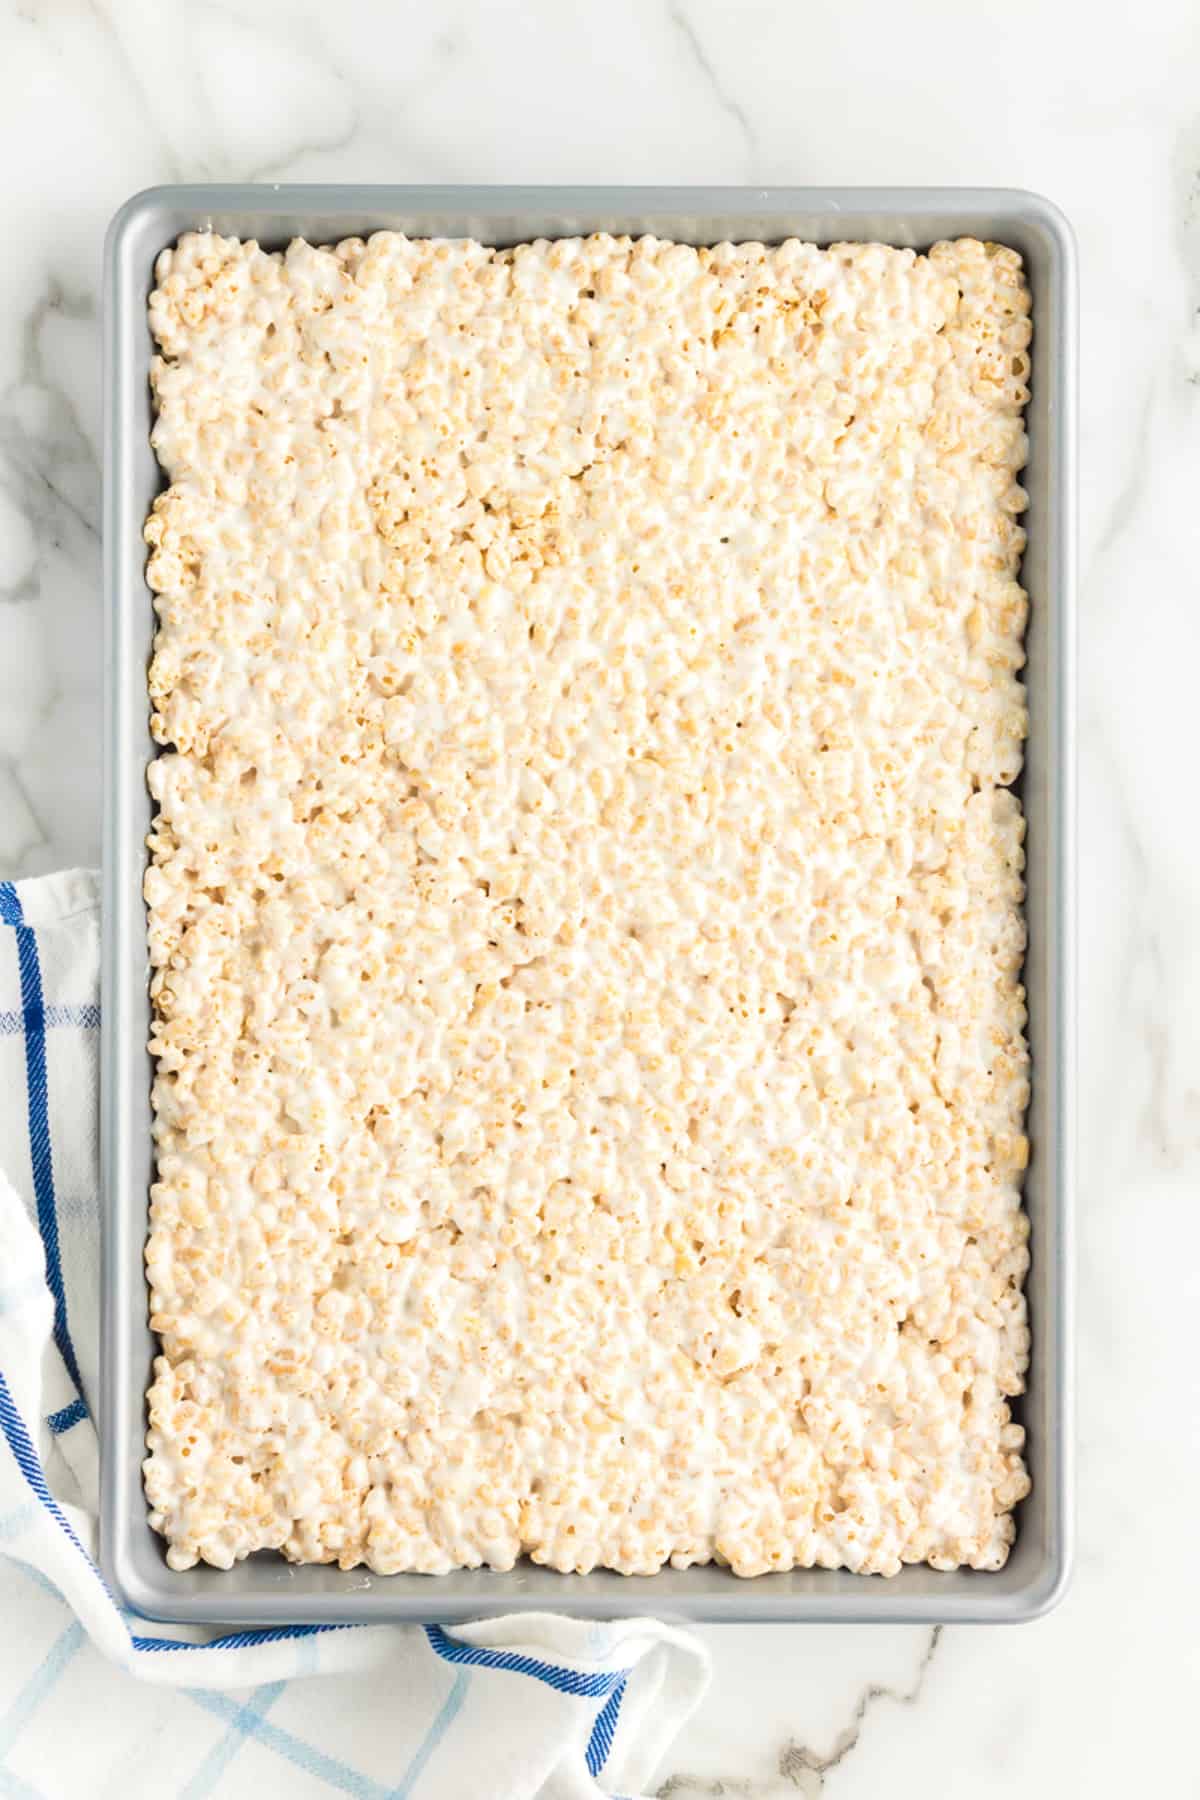 First layer of rice krispie treats in pan